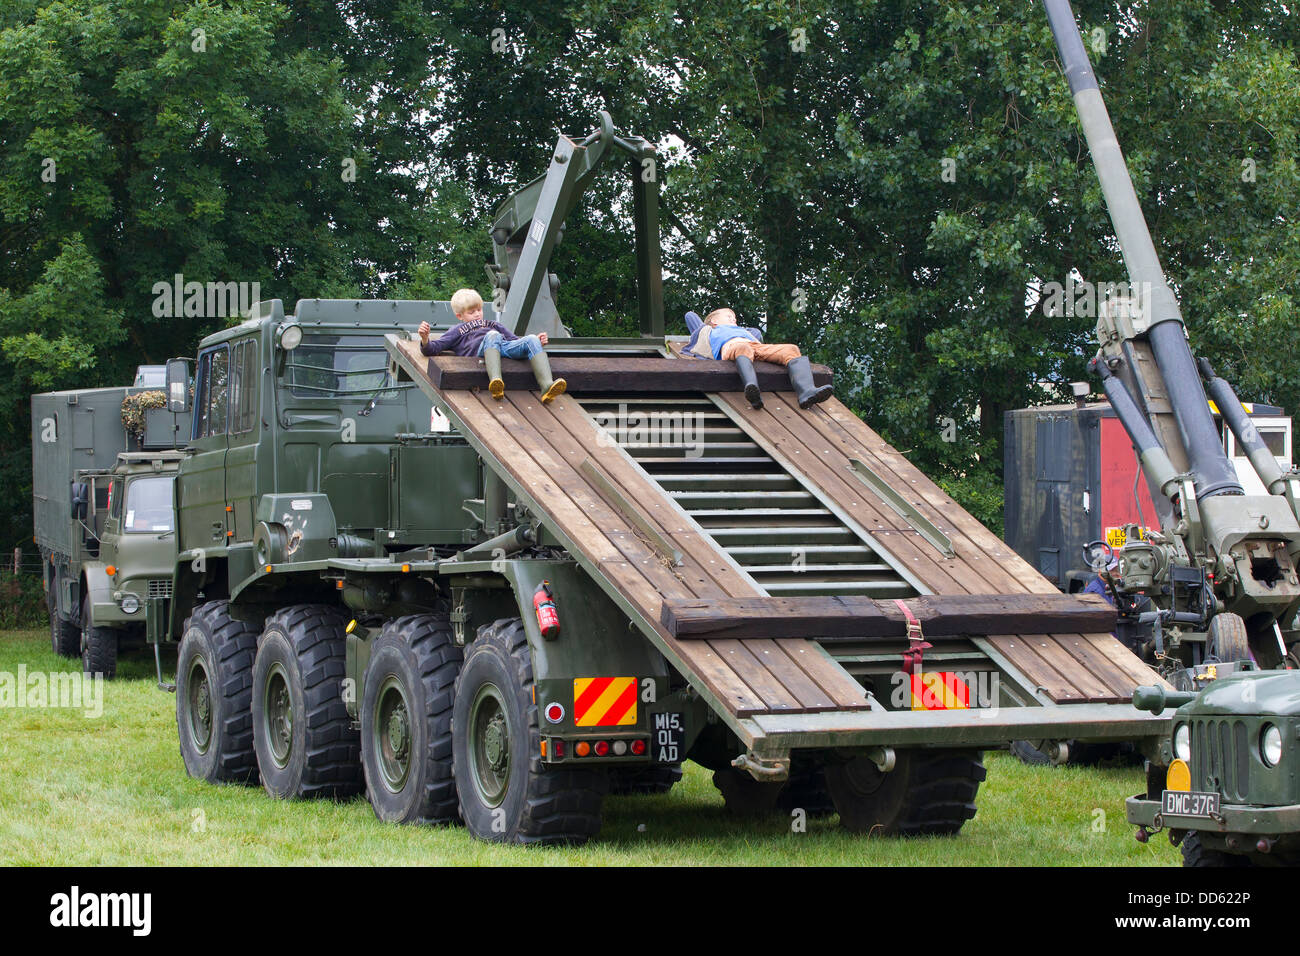 Large army vehicle carrier with children playing on it. Stock Photo